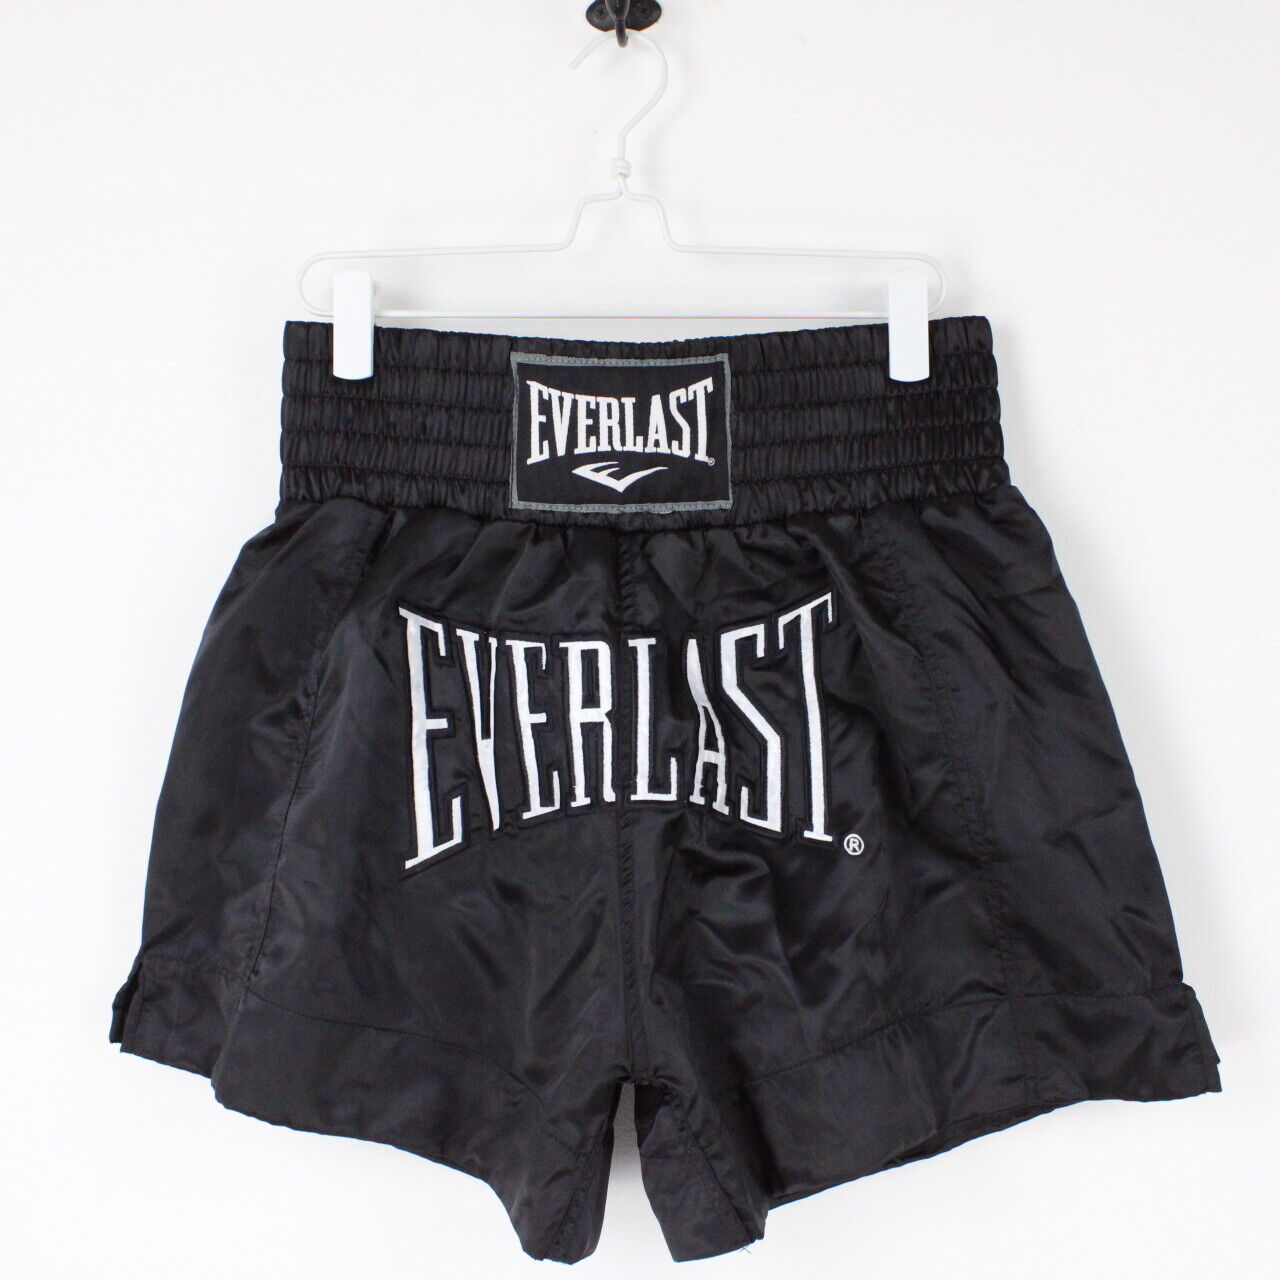 Lot of two Everlast small joggers | Everlast, Joggers, Pants joggers